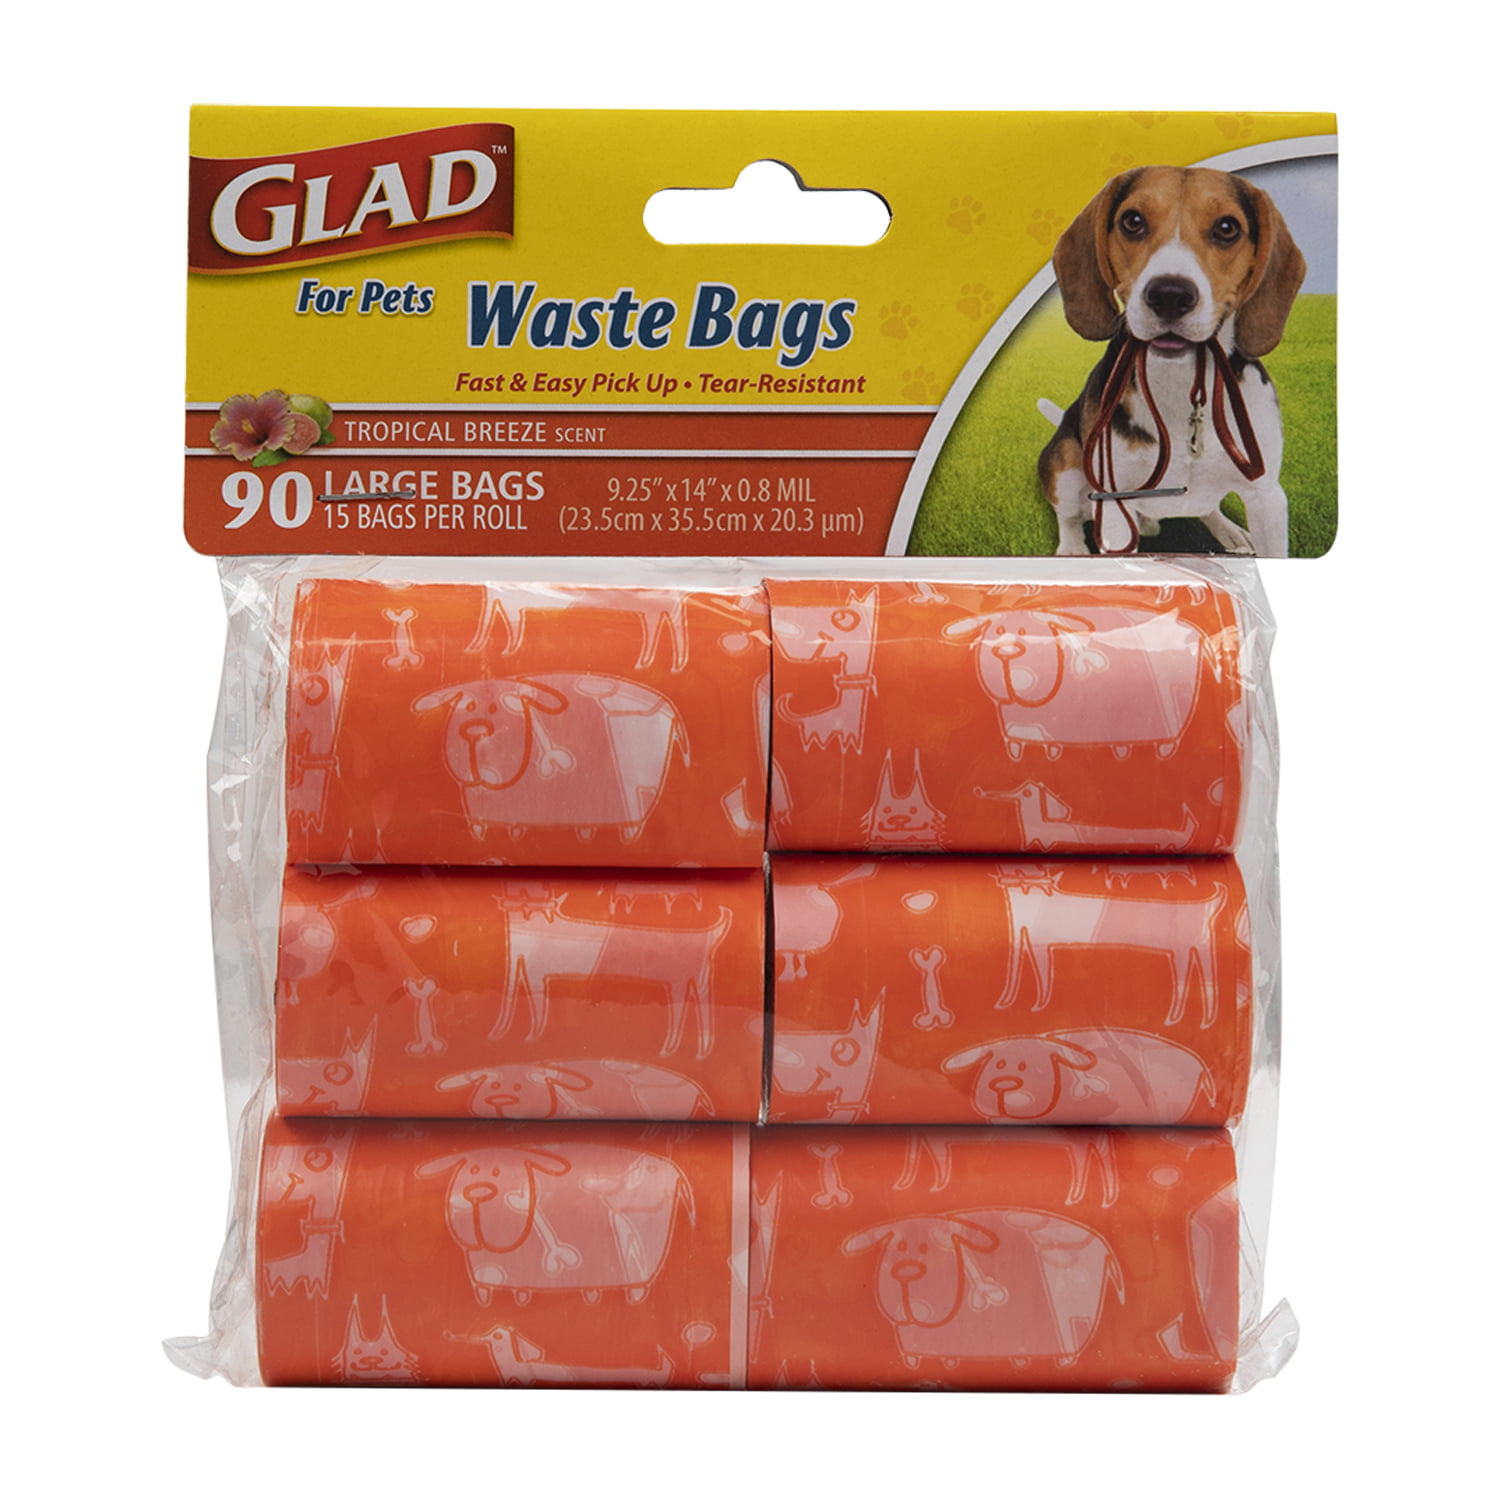 Dog Poop Bag Refills Poop Bags for Dogs 15 Dog Waste Bags Per Roll Glad for Pets Extra Large Dog Waste Bags Refill Rolls 